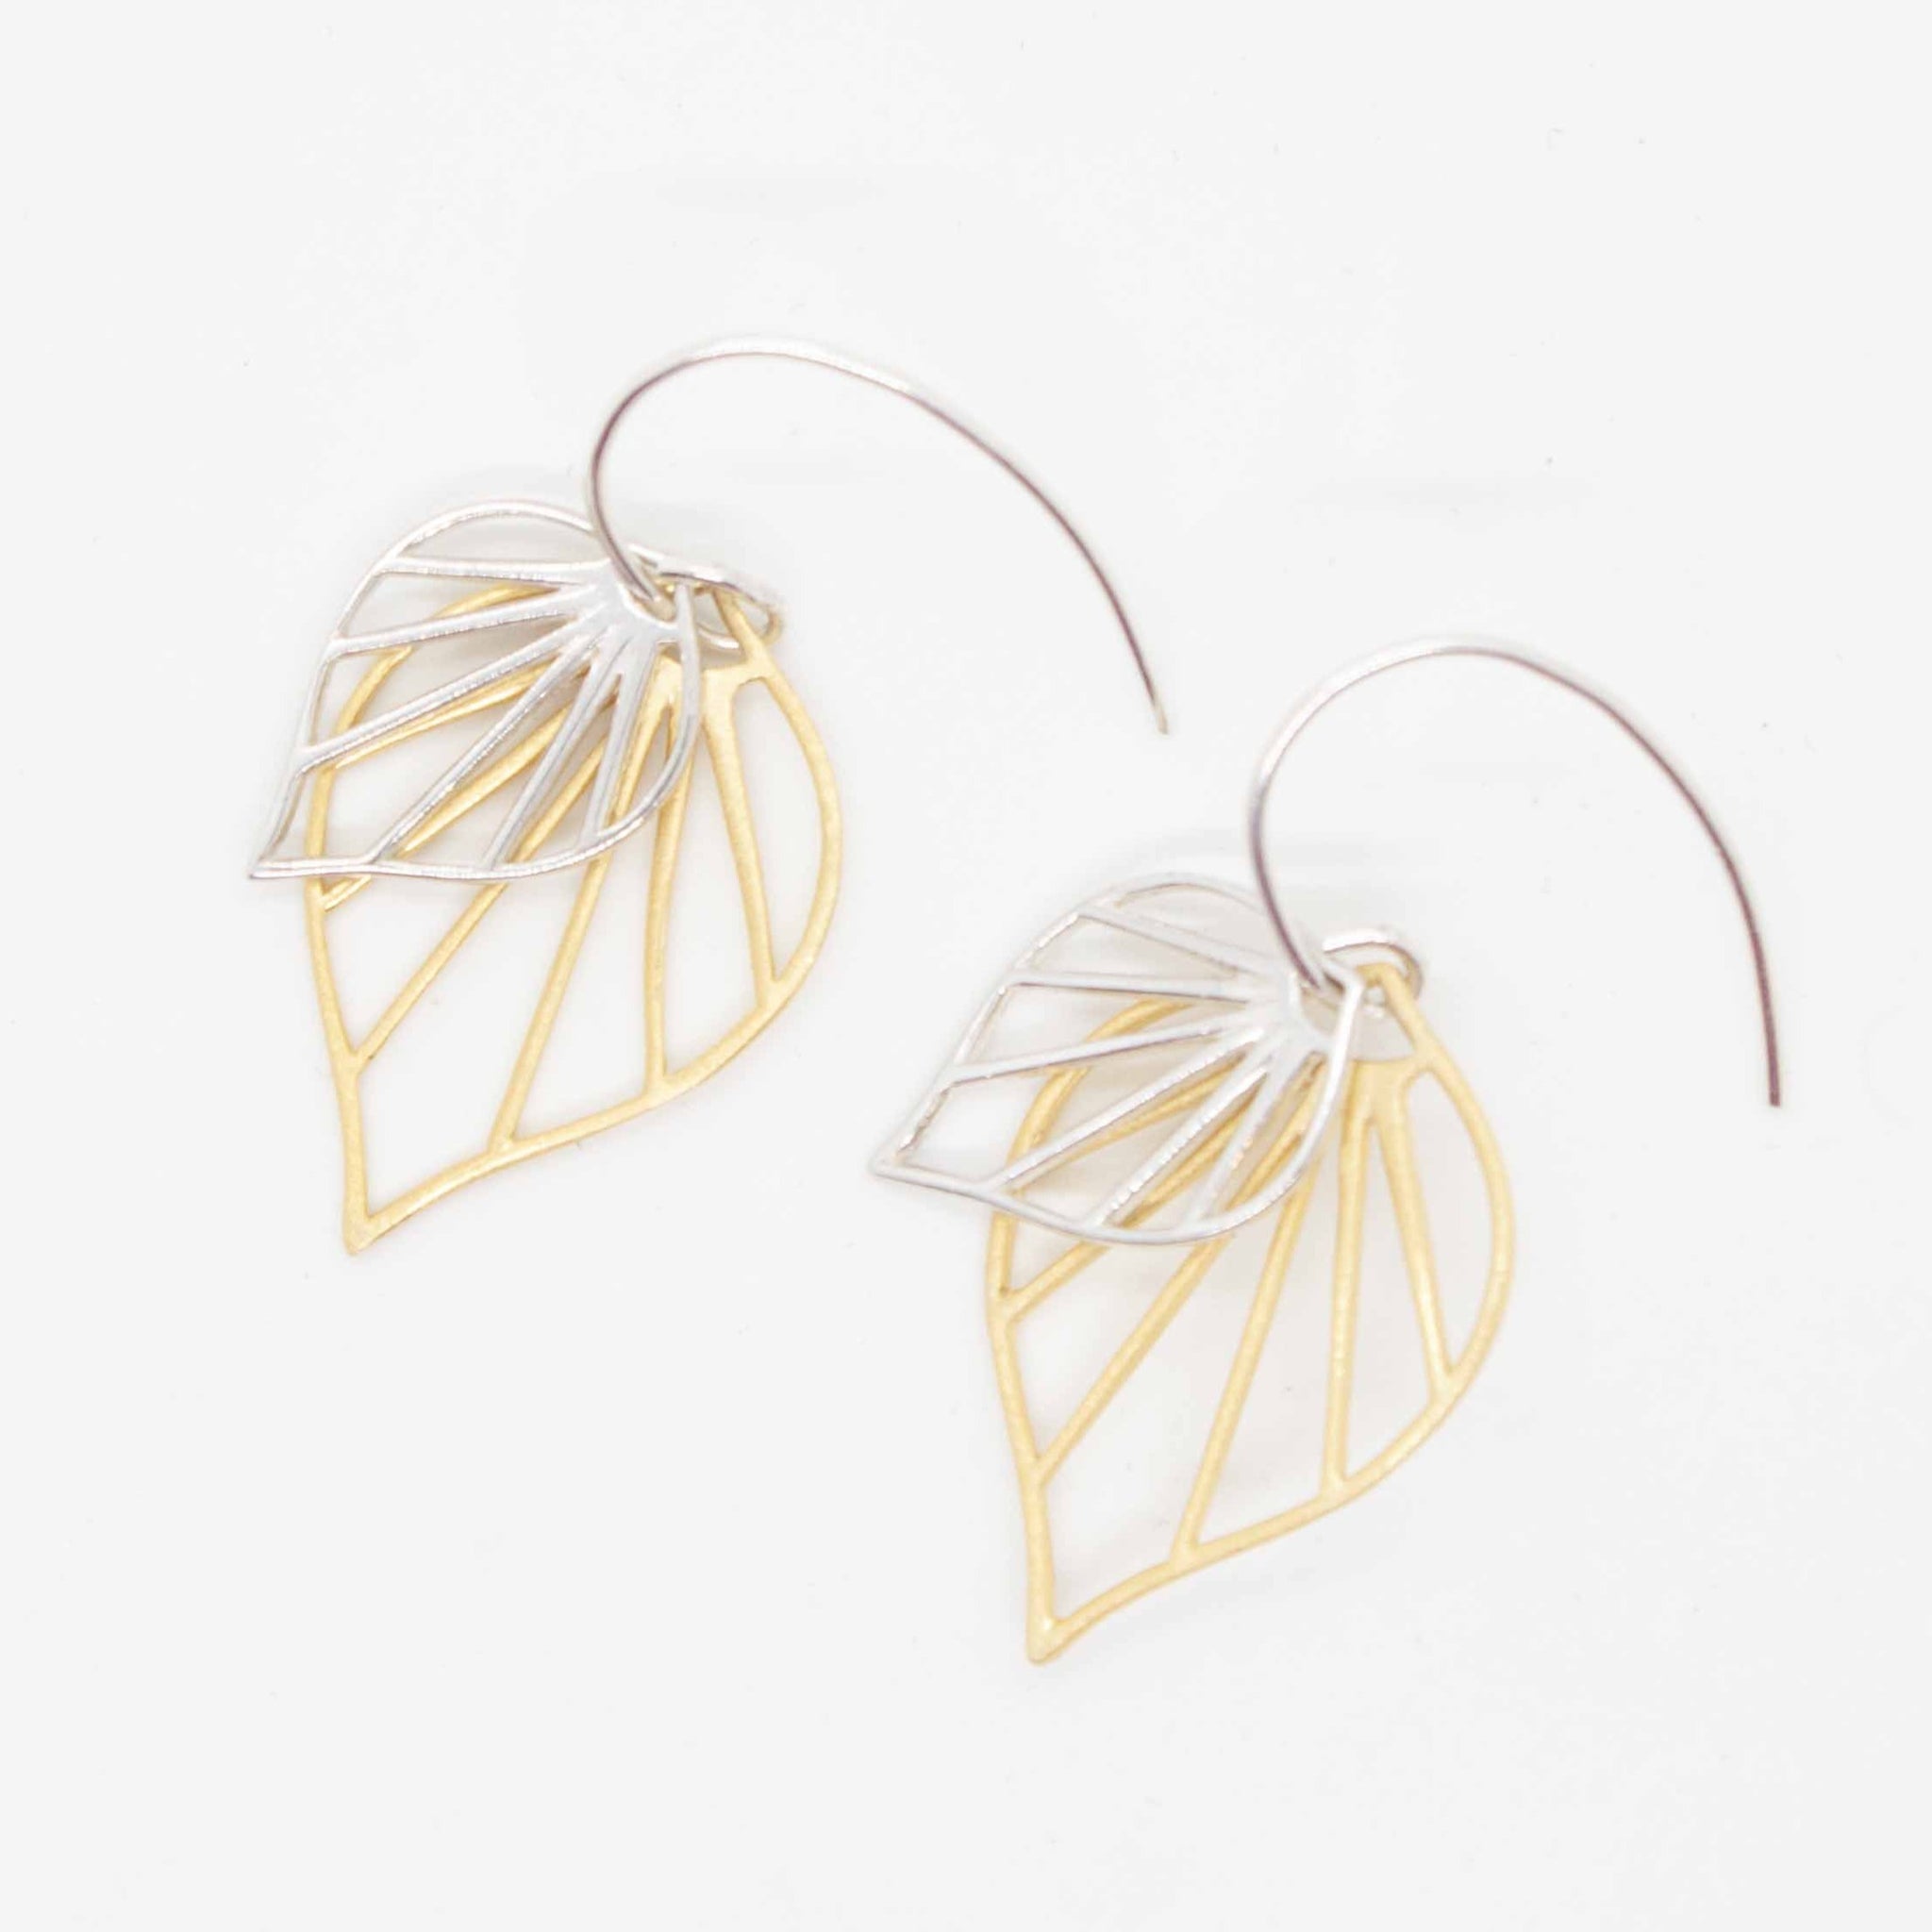 Summon the islands this summer with these voluptuous gold and silver palm leaves! 1 1/4 inch earrings, with gold vermeil & sterling silver palm charms on sterling silver earring hooks. Handmade in Toronto by kp jewelry co.